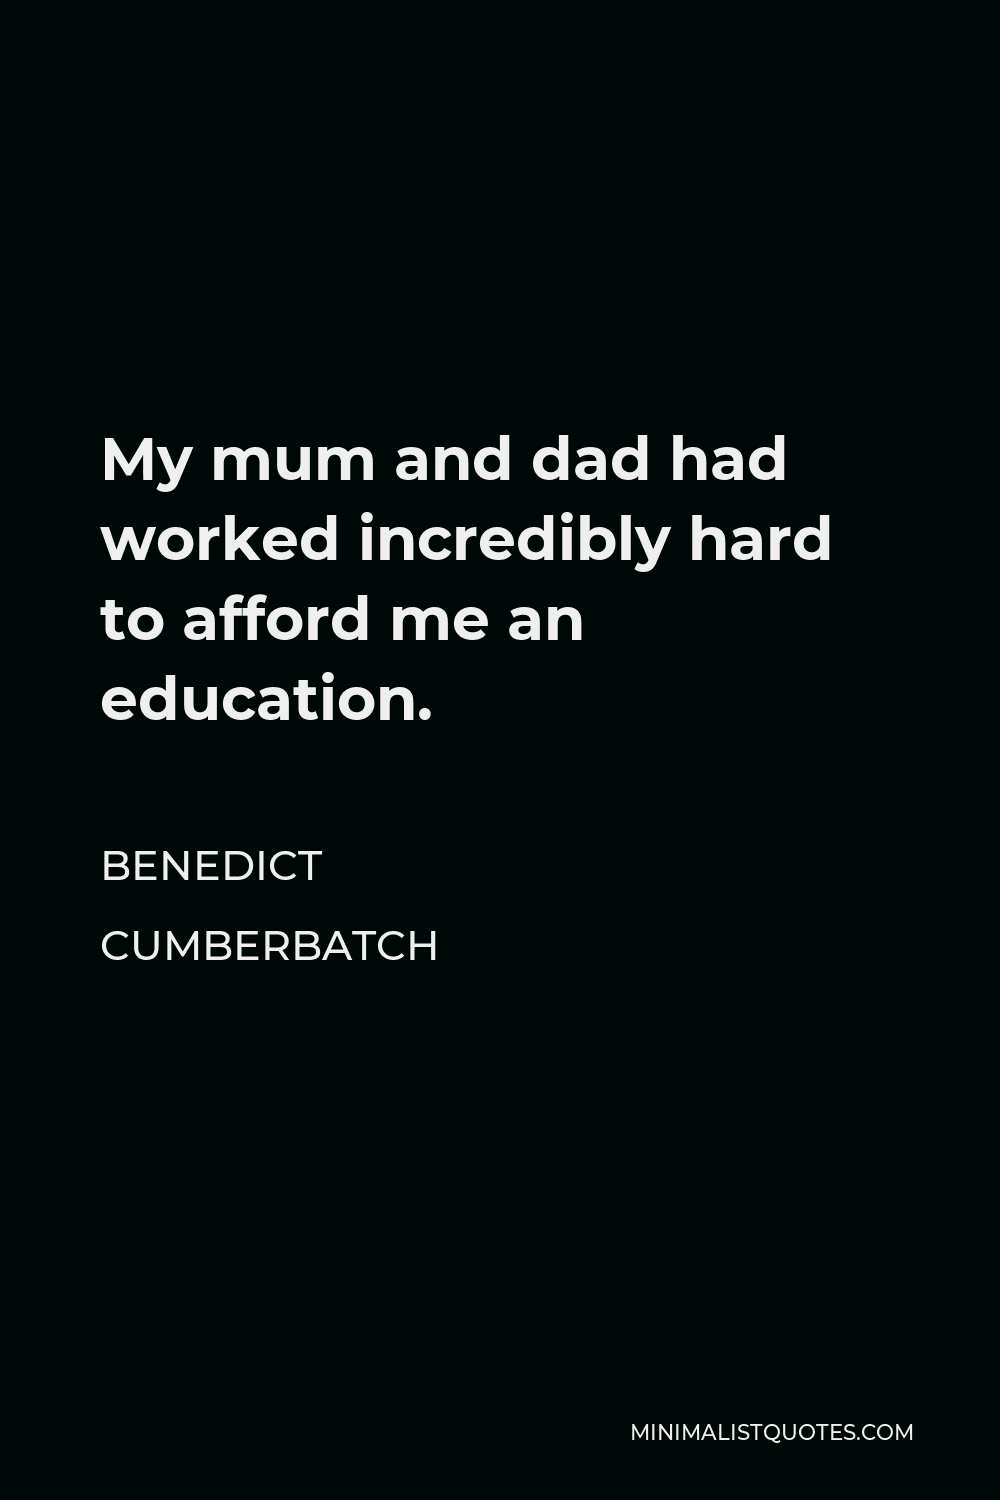 Benedict Cumberbatch Quote - My mum and dad had worked incredibly hard to afford me an education.